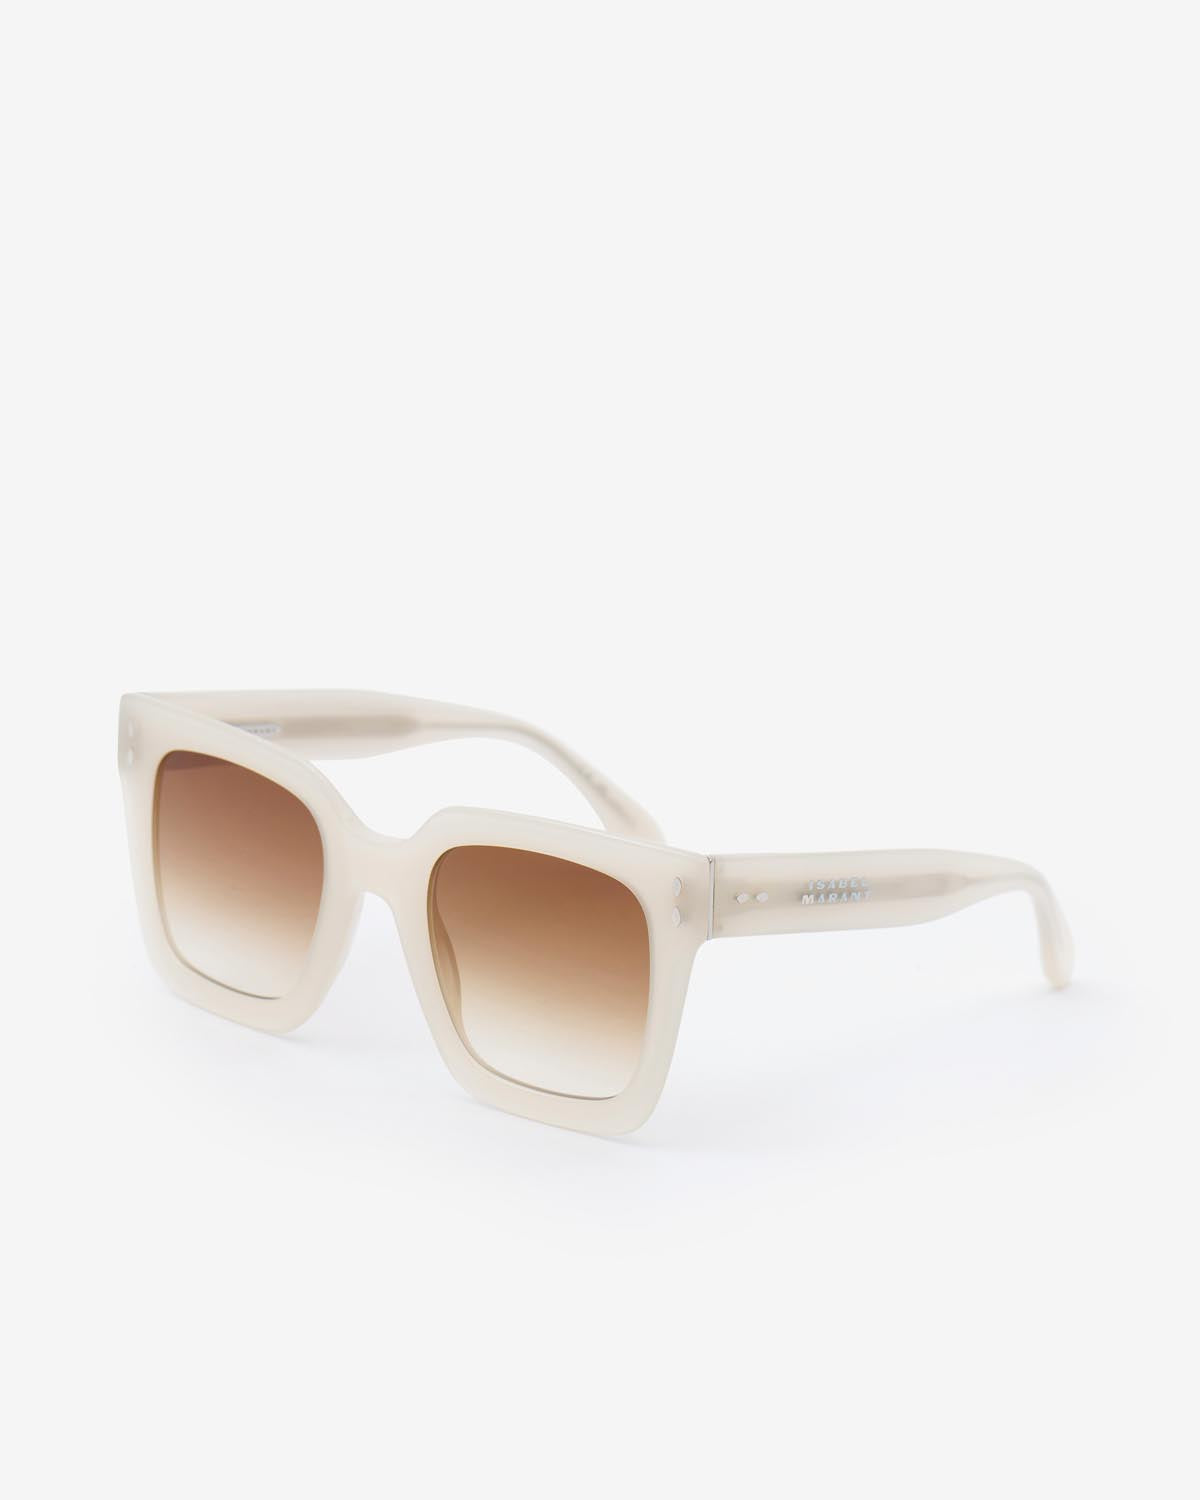 Sonnenbrille ekly Woman Ivory-brown shaded 1